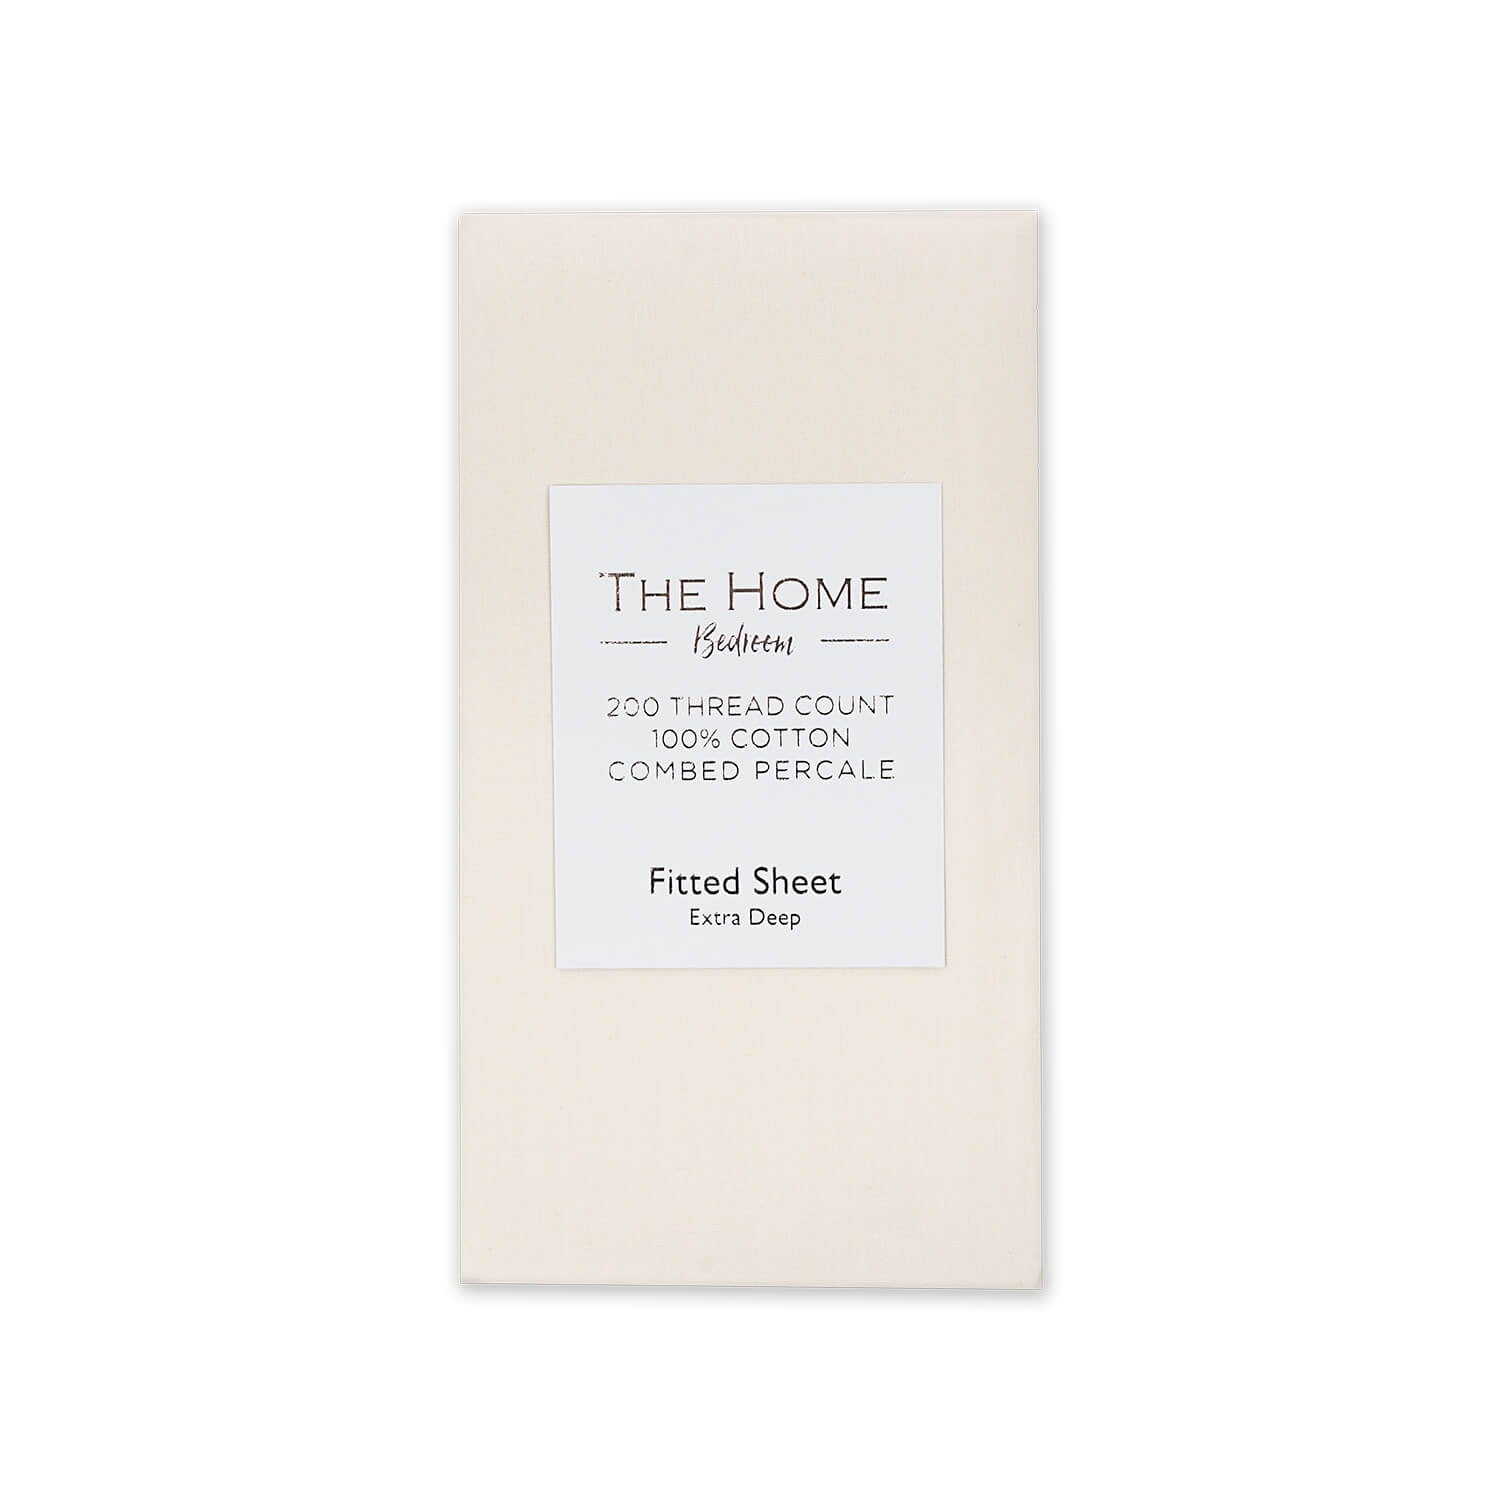 The Home Bedroom 200 Thread Count 100% Cotton Extra Deep Fitted Sheet - Cream - Super King 1 Shaws Department Stores